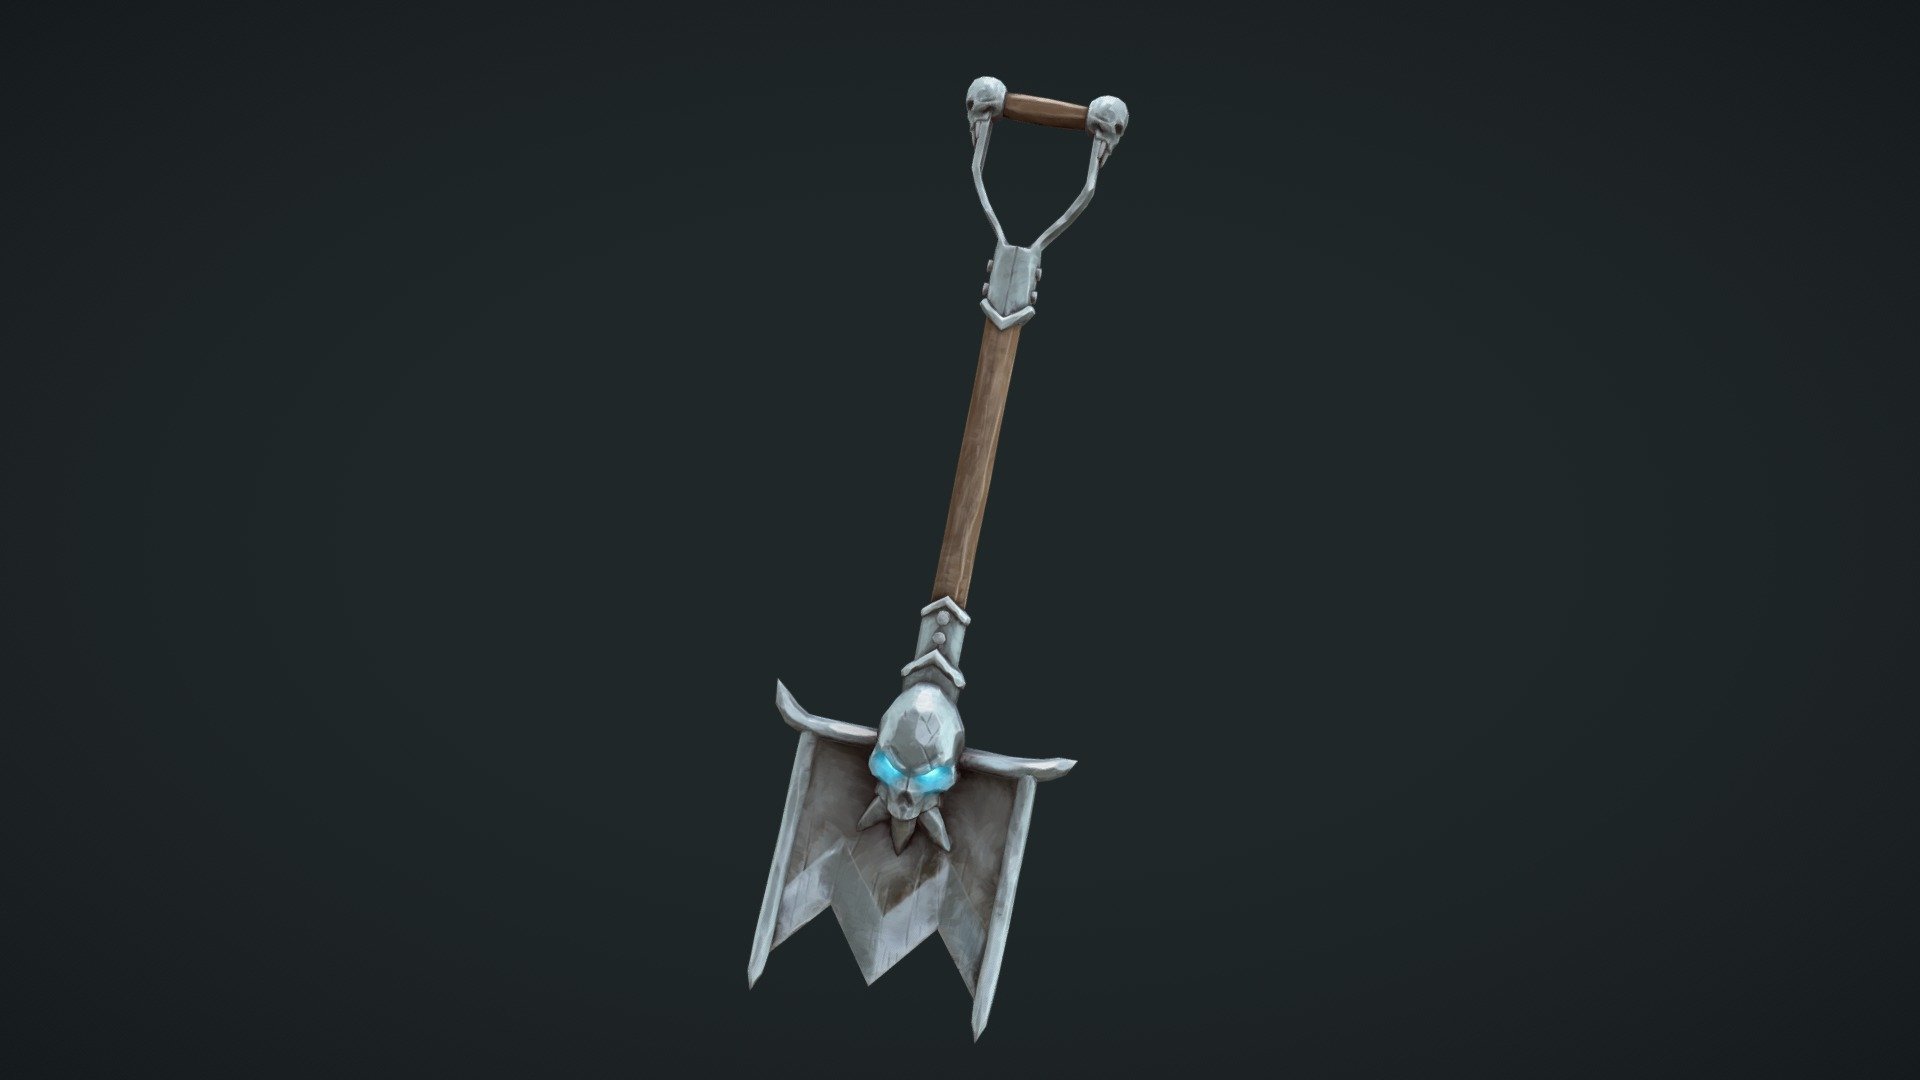 From the first time I got this quest item in booty bay (https://classic.wowhead.com/item=4128/silver-spade) in world of warcraft I thought they did the model dirty when compared to the epic icon for this mace. So I decided to do the re-imaginening of model I think it deserves 3d model